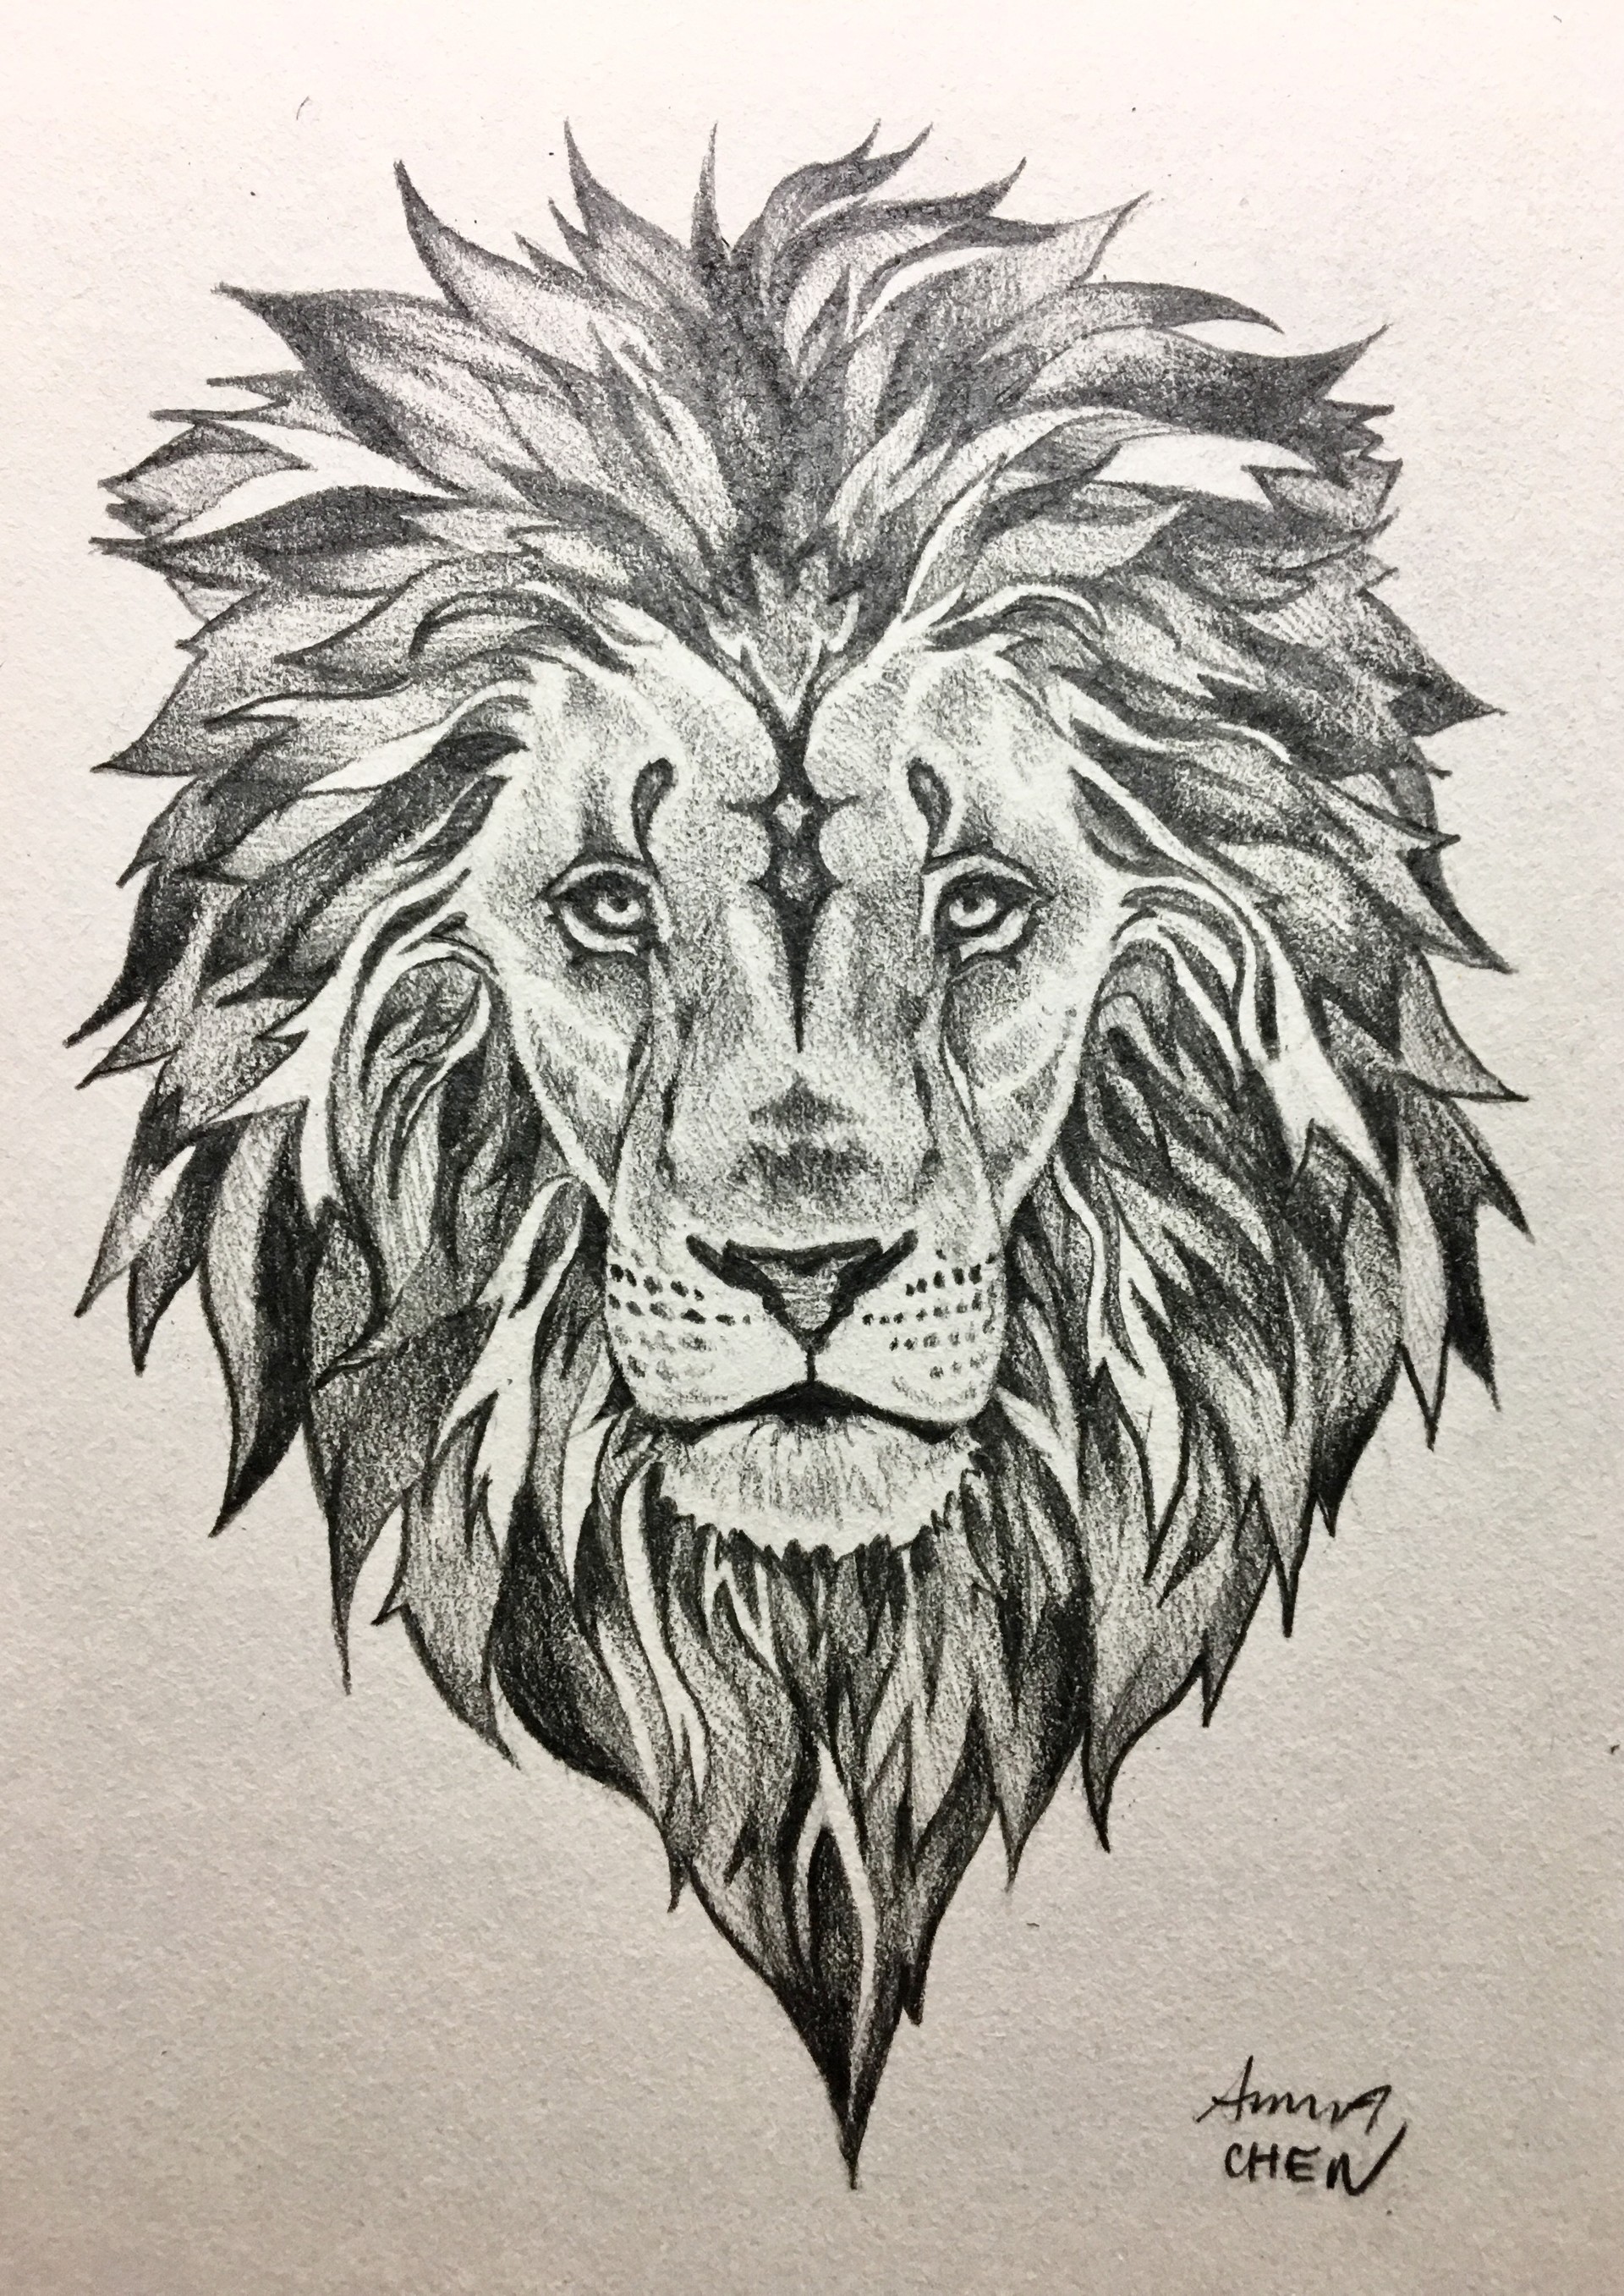 Sketch work style lion and lioness tattoo on the chest.